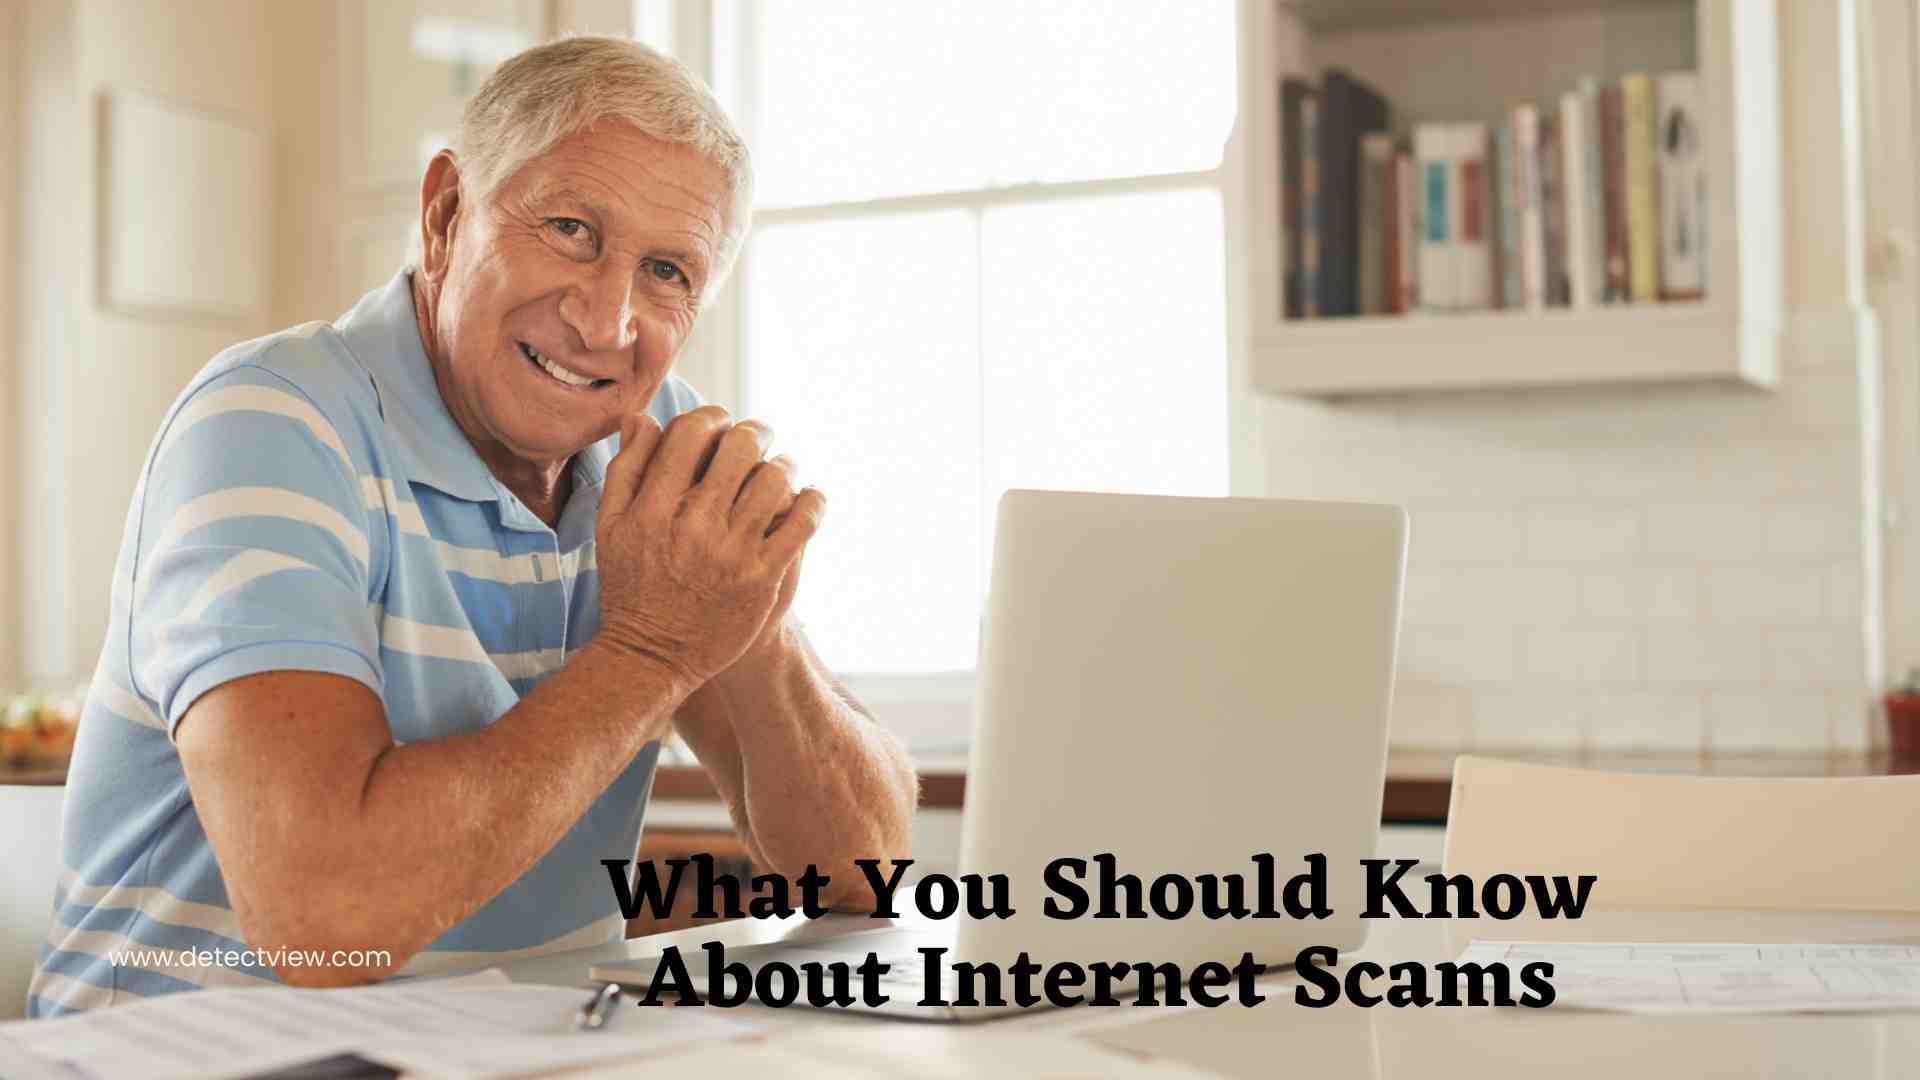 What You Should Know About Internet Scams